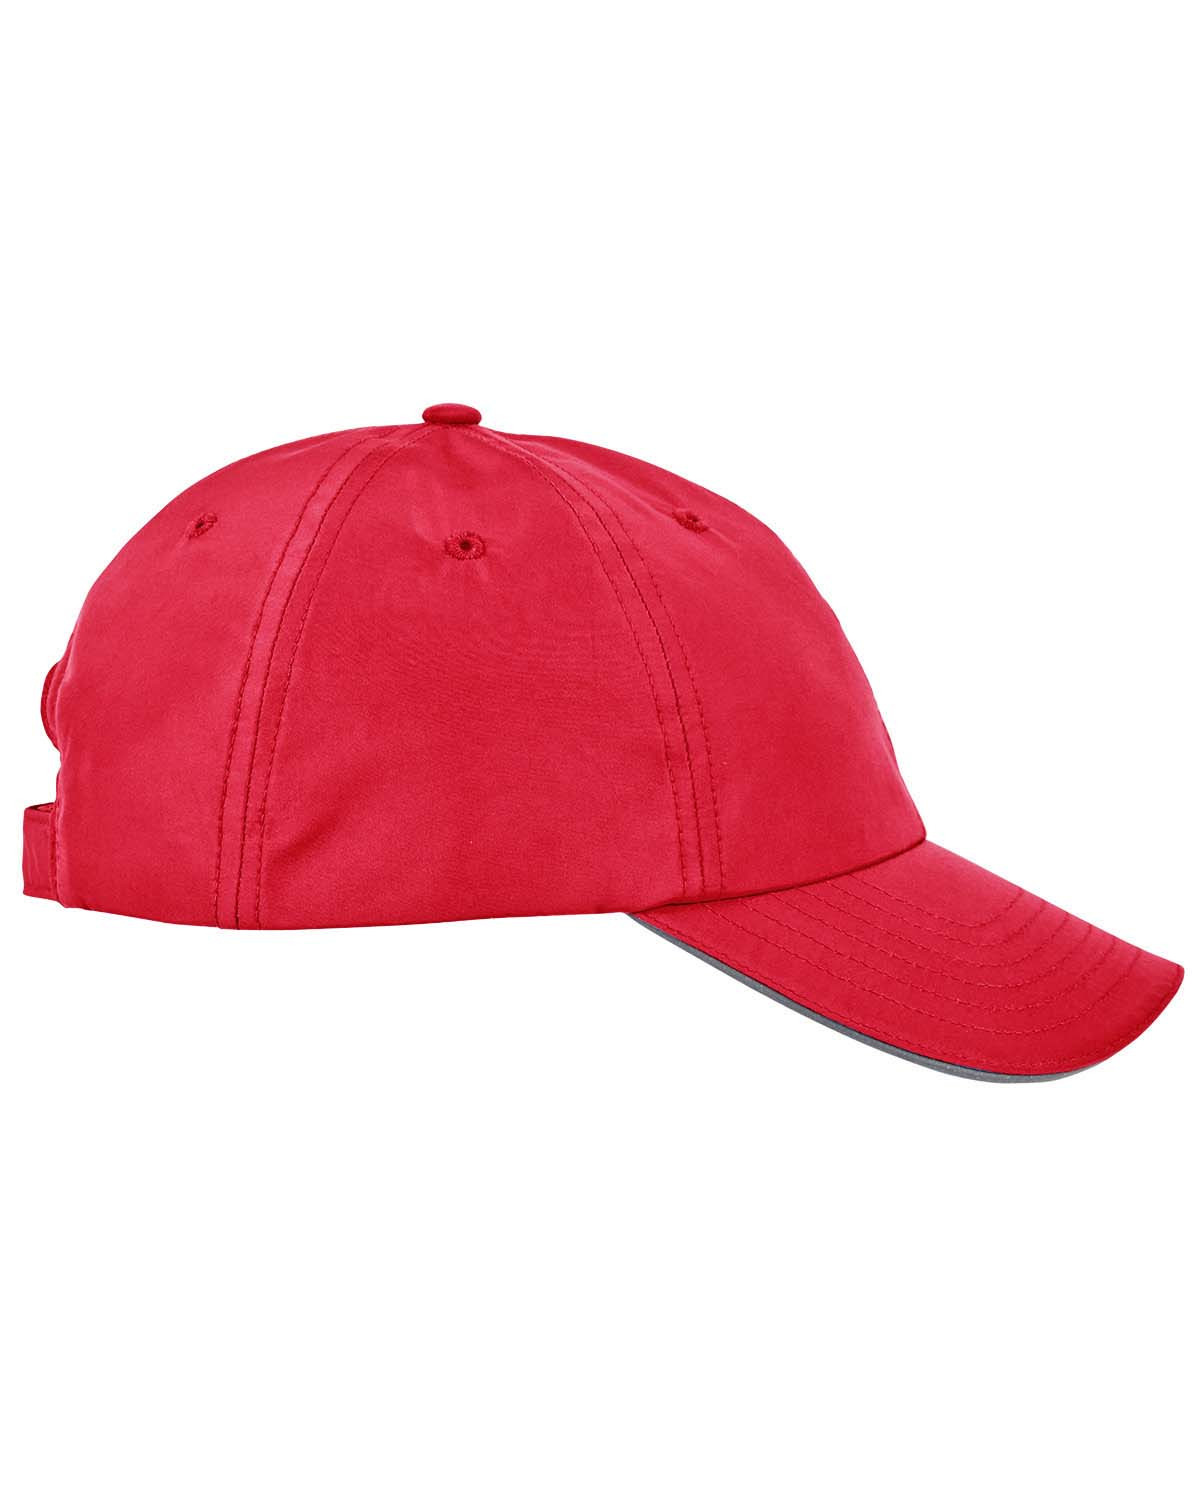 Core 365 CE001 - Adult Pitch Performance Cap - CLASSIC RED - OS